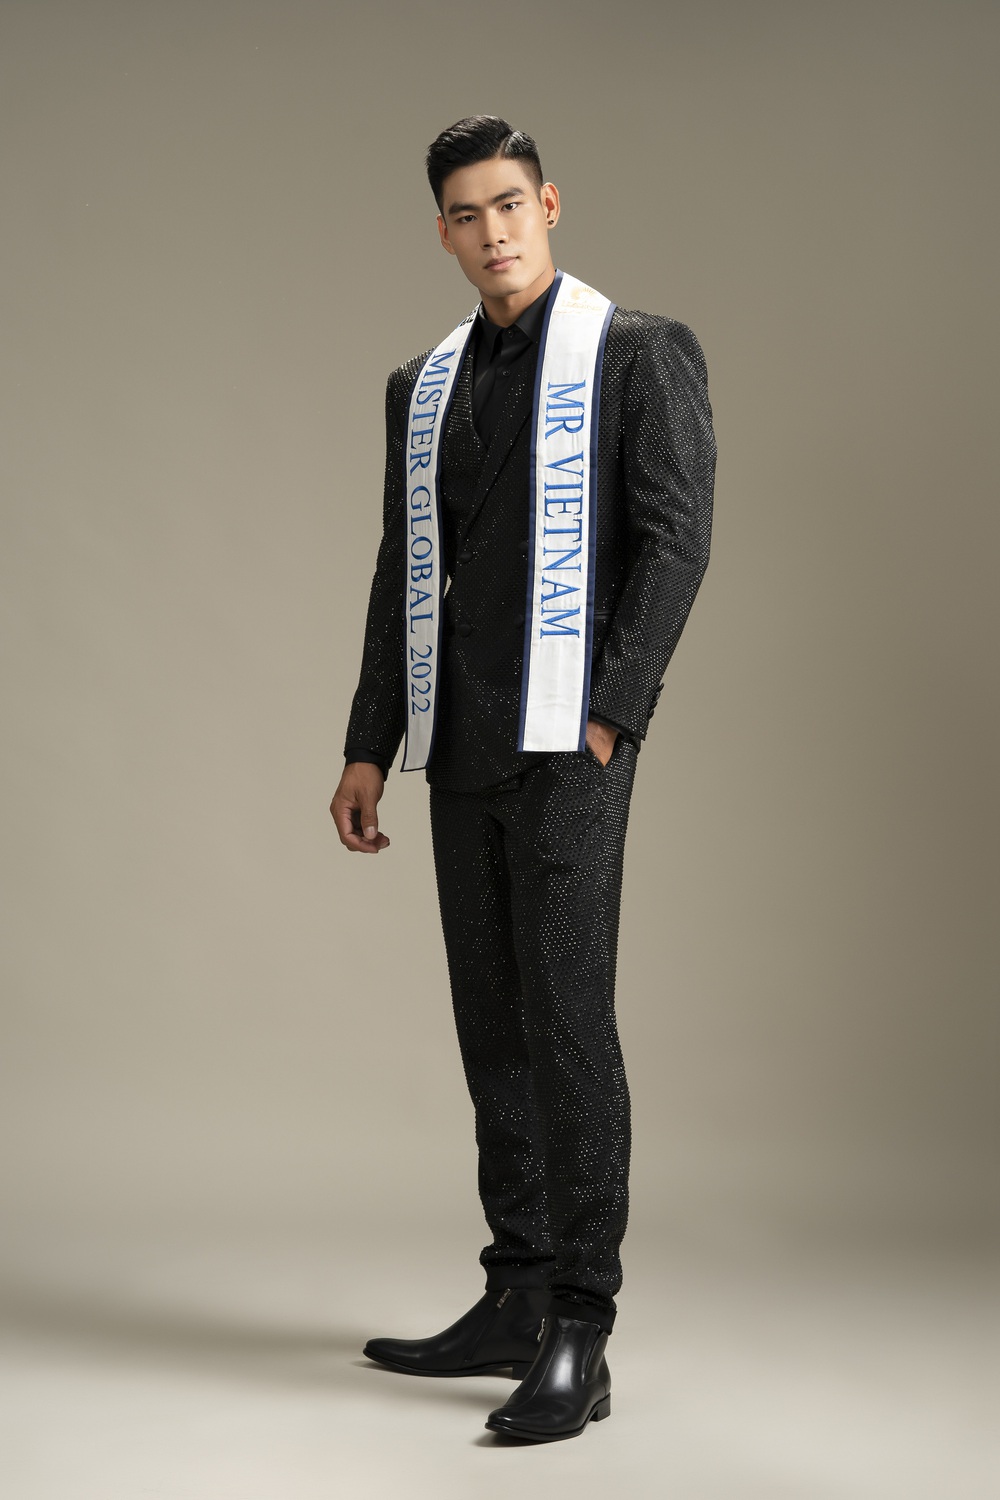 Danh Chieu Linh won the title of 1st runner-up Mister Global: I do not believe this is true - Photo 1.